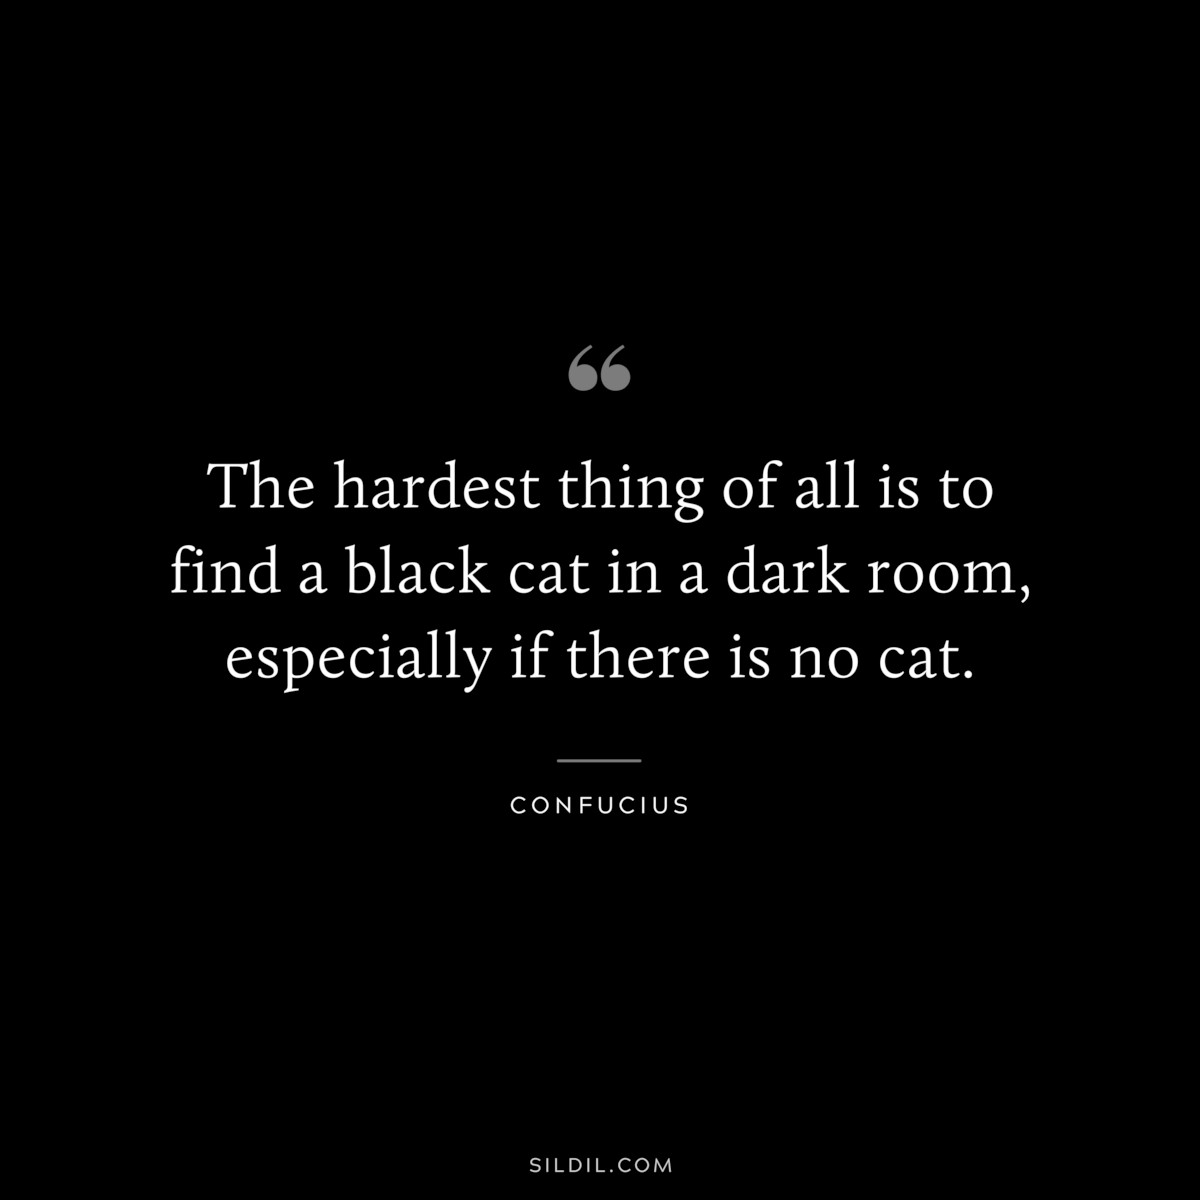 The hardest thing of all is to find a black cat in a dark room, especially if there is no cat. ― Confucius